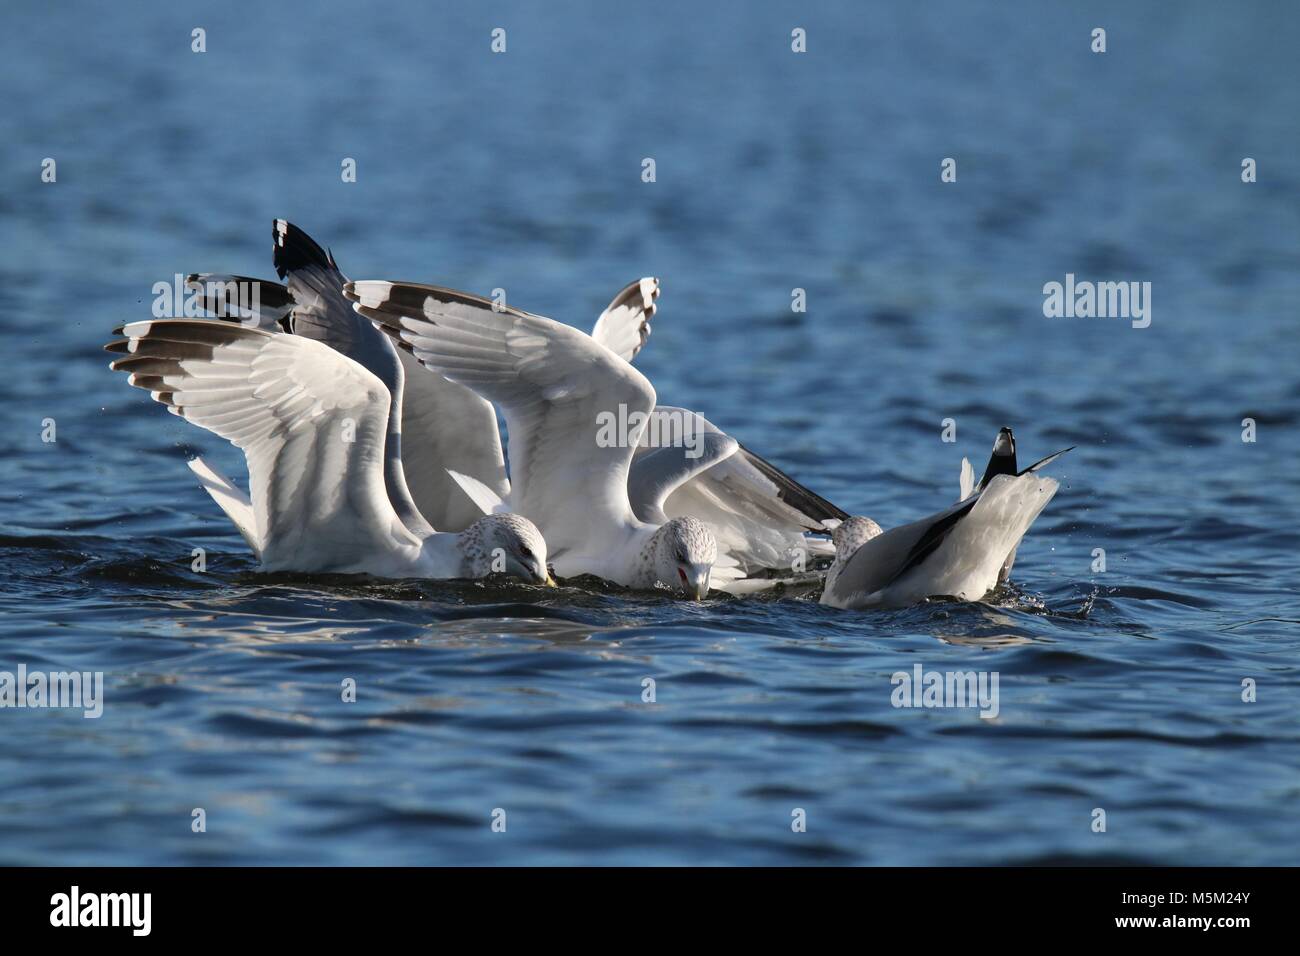 A flock of greedy seagulls compete with each other to eat food in the water.  Concept: Survival of the fittest, competition for limited resources Stock Photo